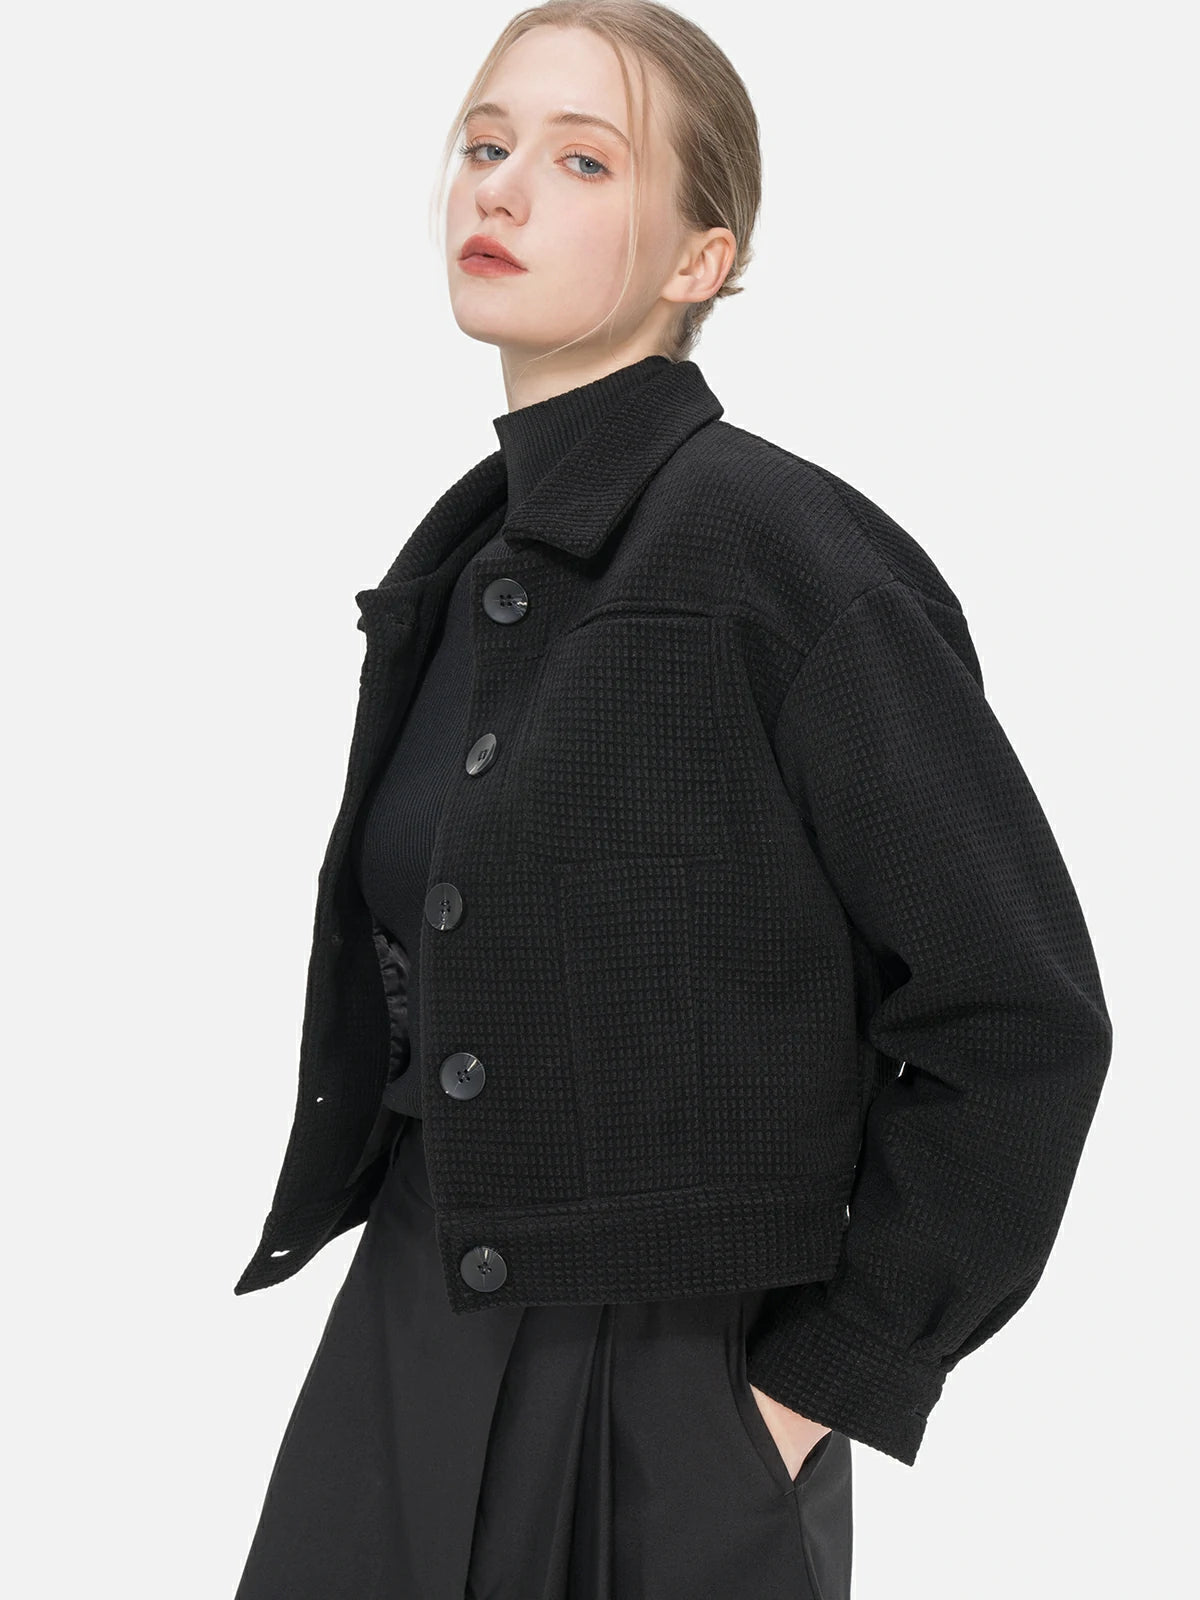 Make a style statement with this elegant black short jacket, showcasing a collared design, a unique waffle-grid pattern, and a snug fit.